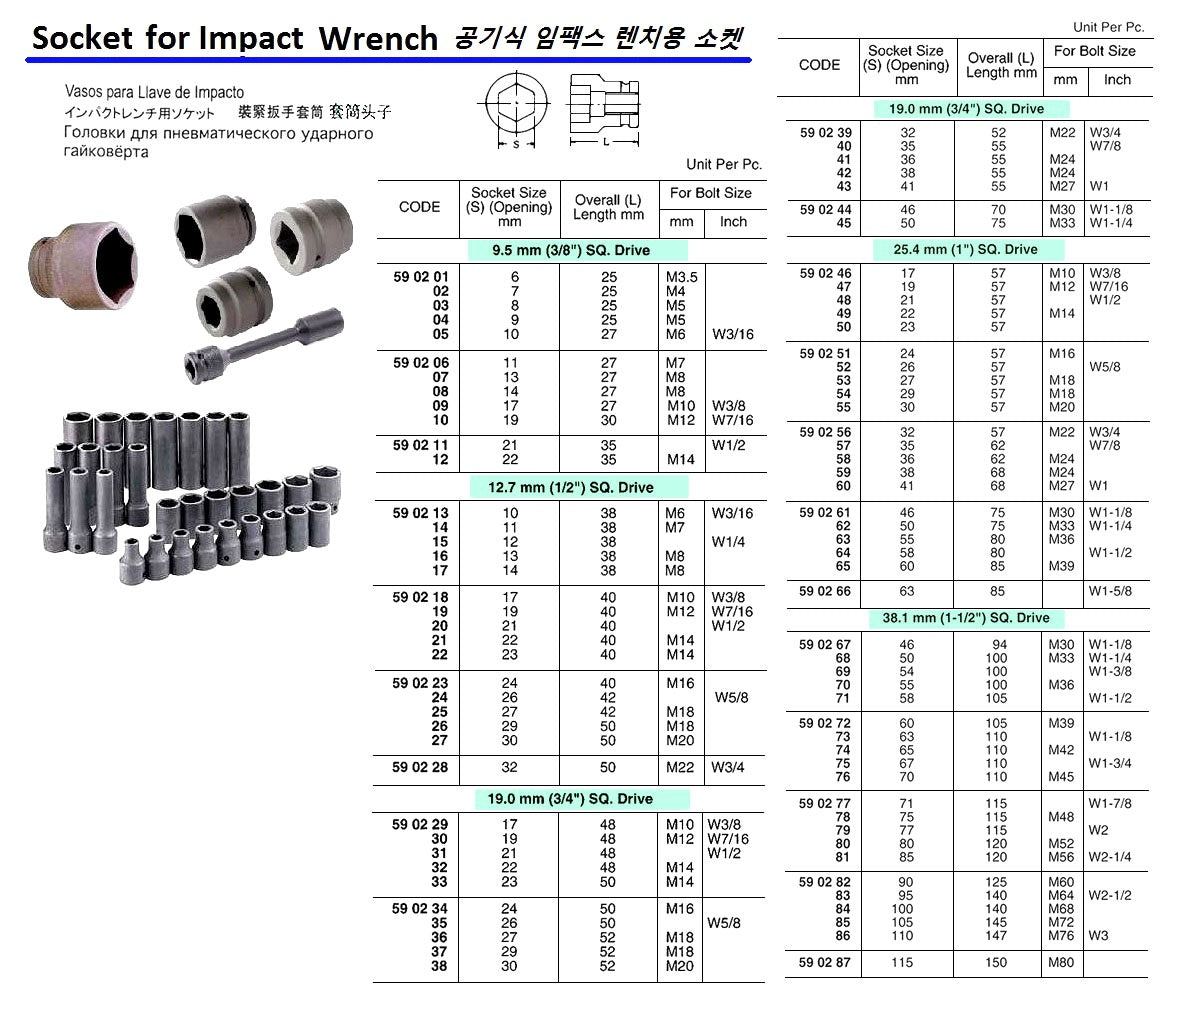 590206-SOCKET FOR IMPACT WRENCH, 9.5MM/SQ DR. X 11MM